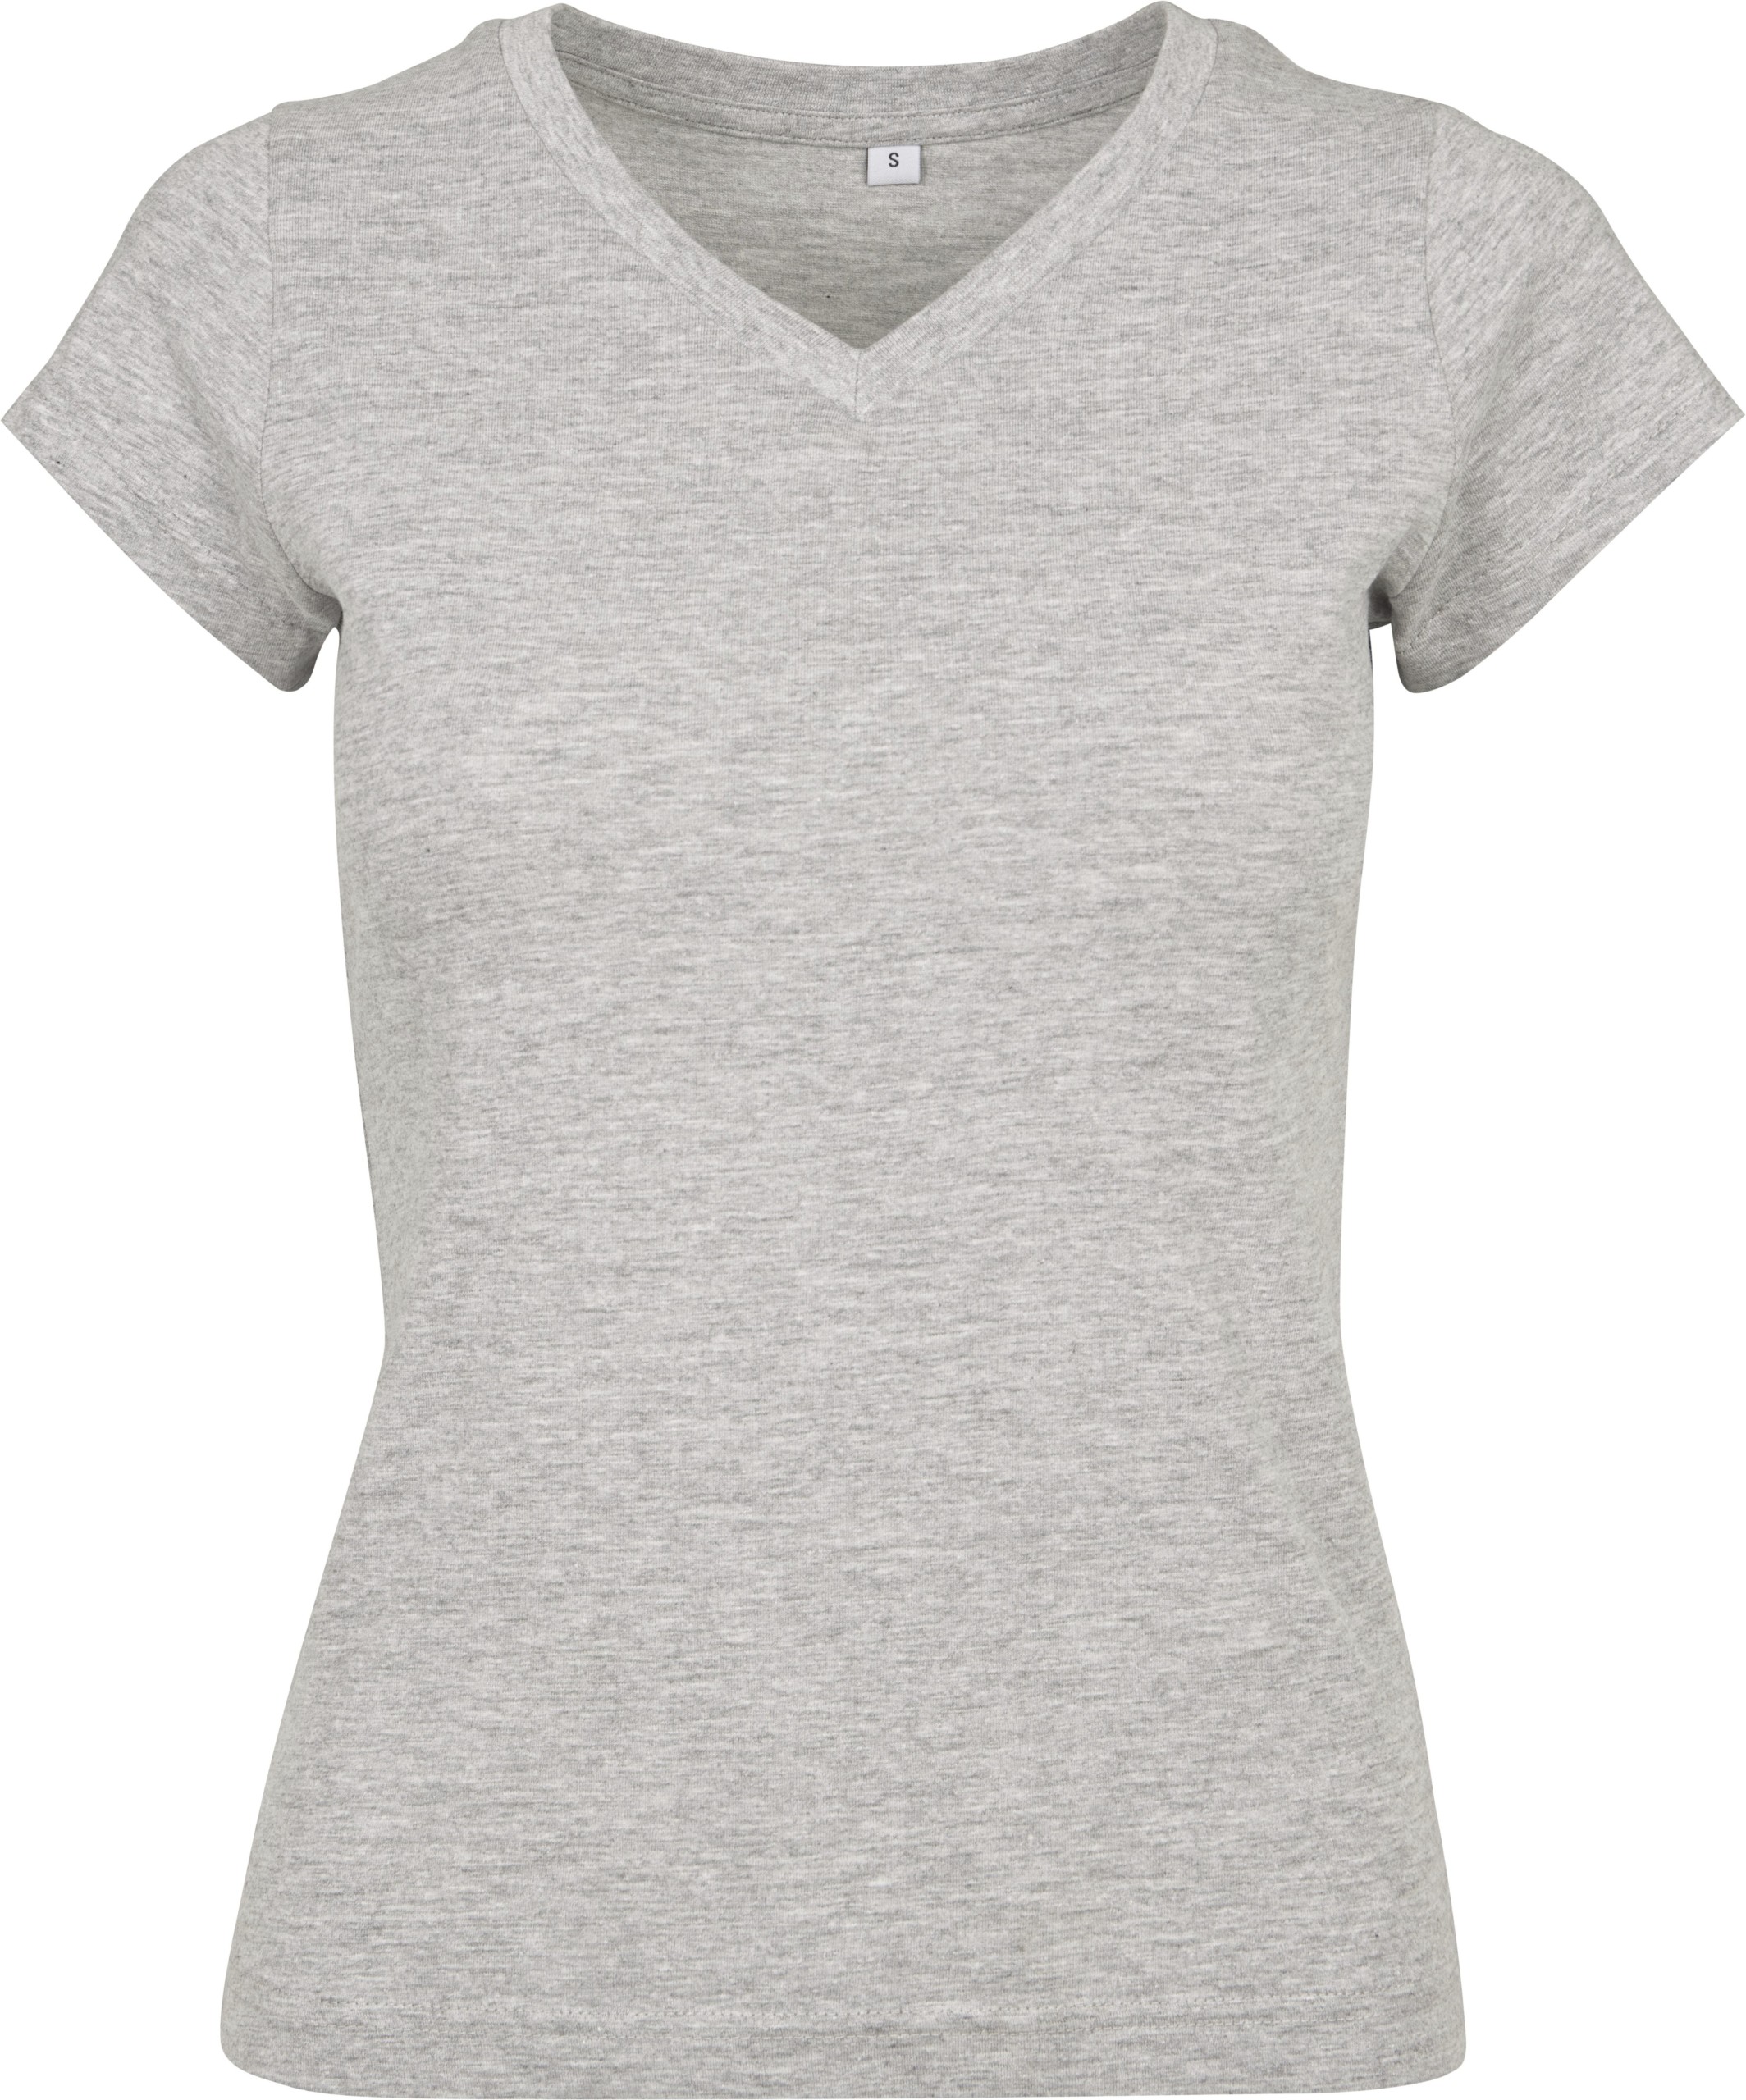 Build Your Brand - Build Your Brand - Ladies´ Basic Tee - BY062